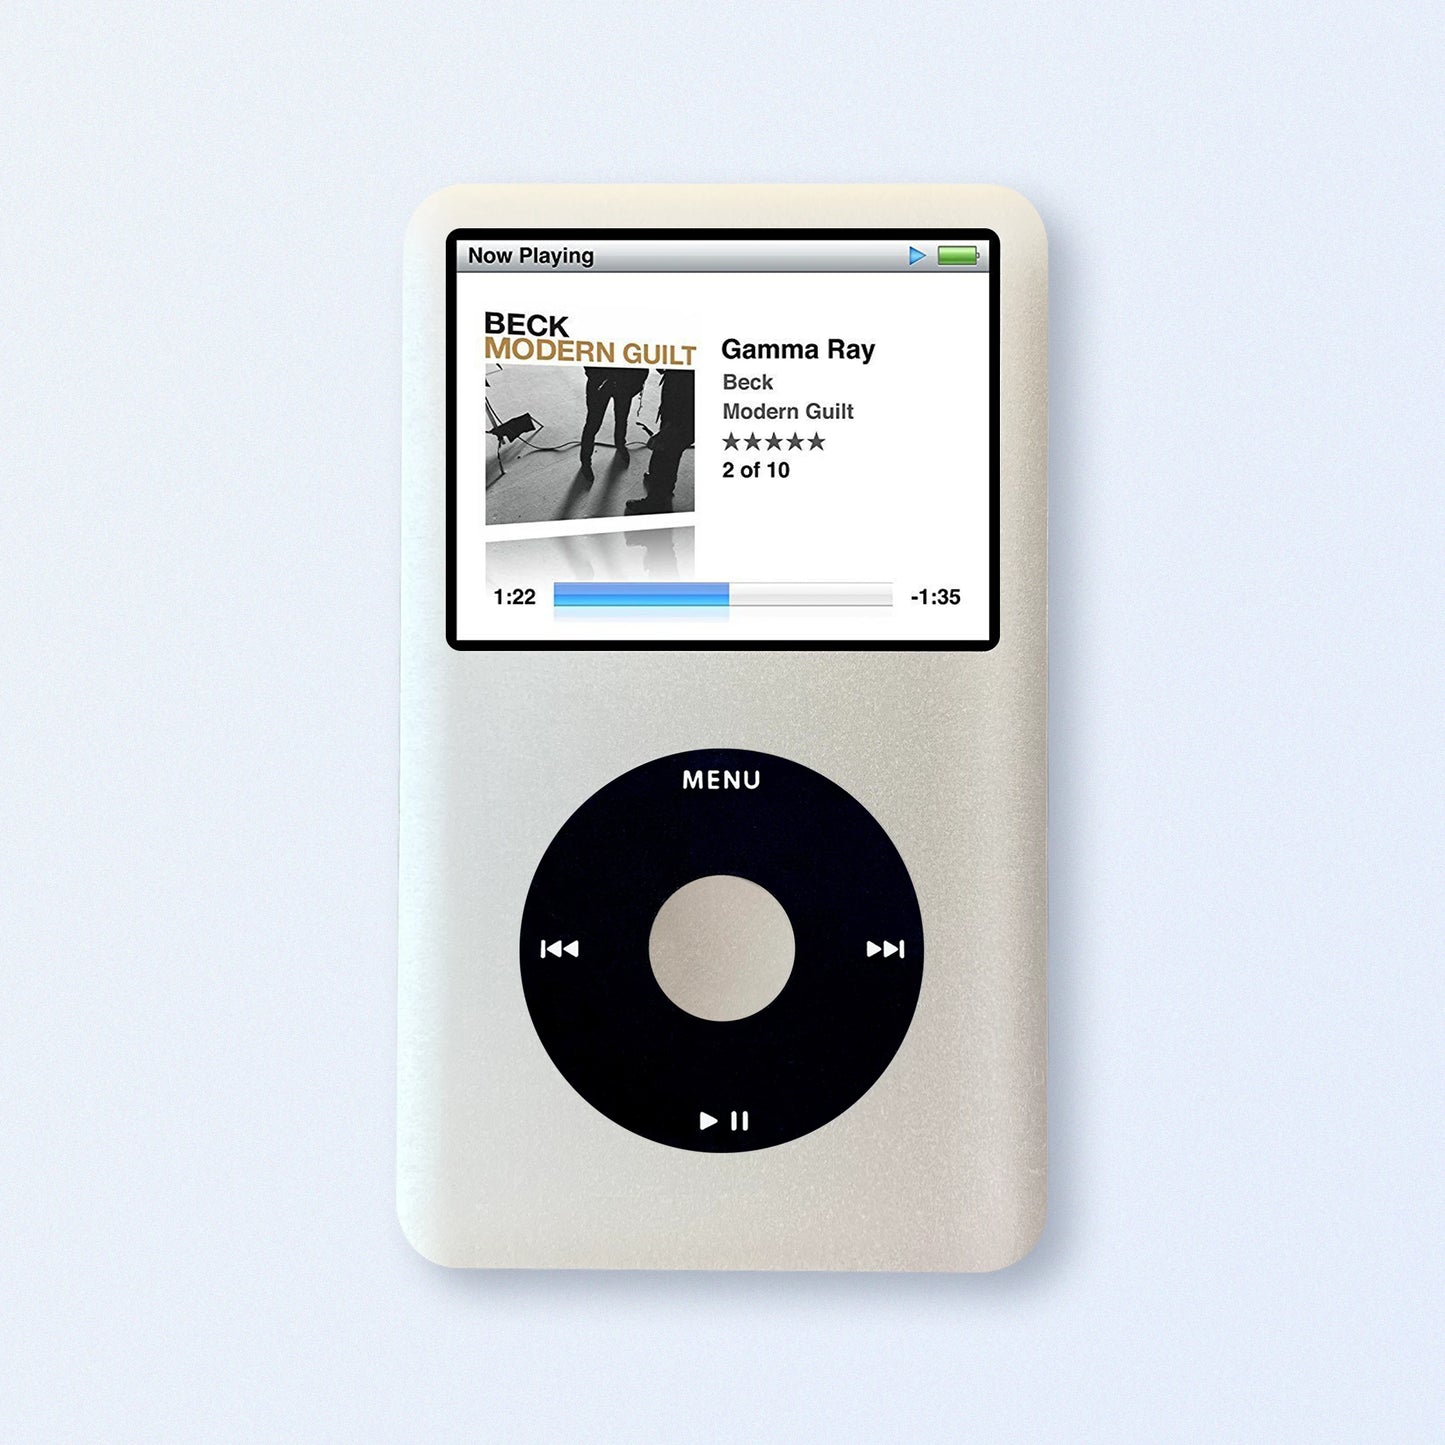 Silver iPod Classic 7th Gen upgraded SDXC Personalised Media Player